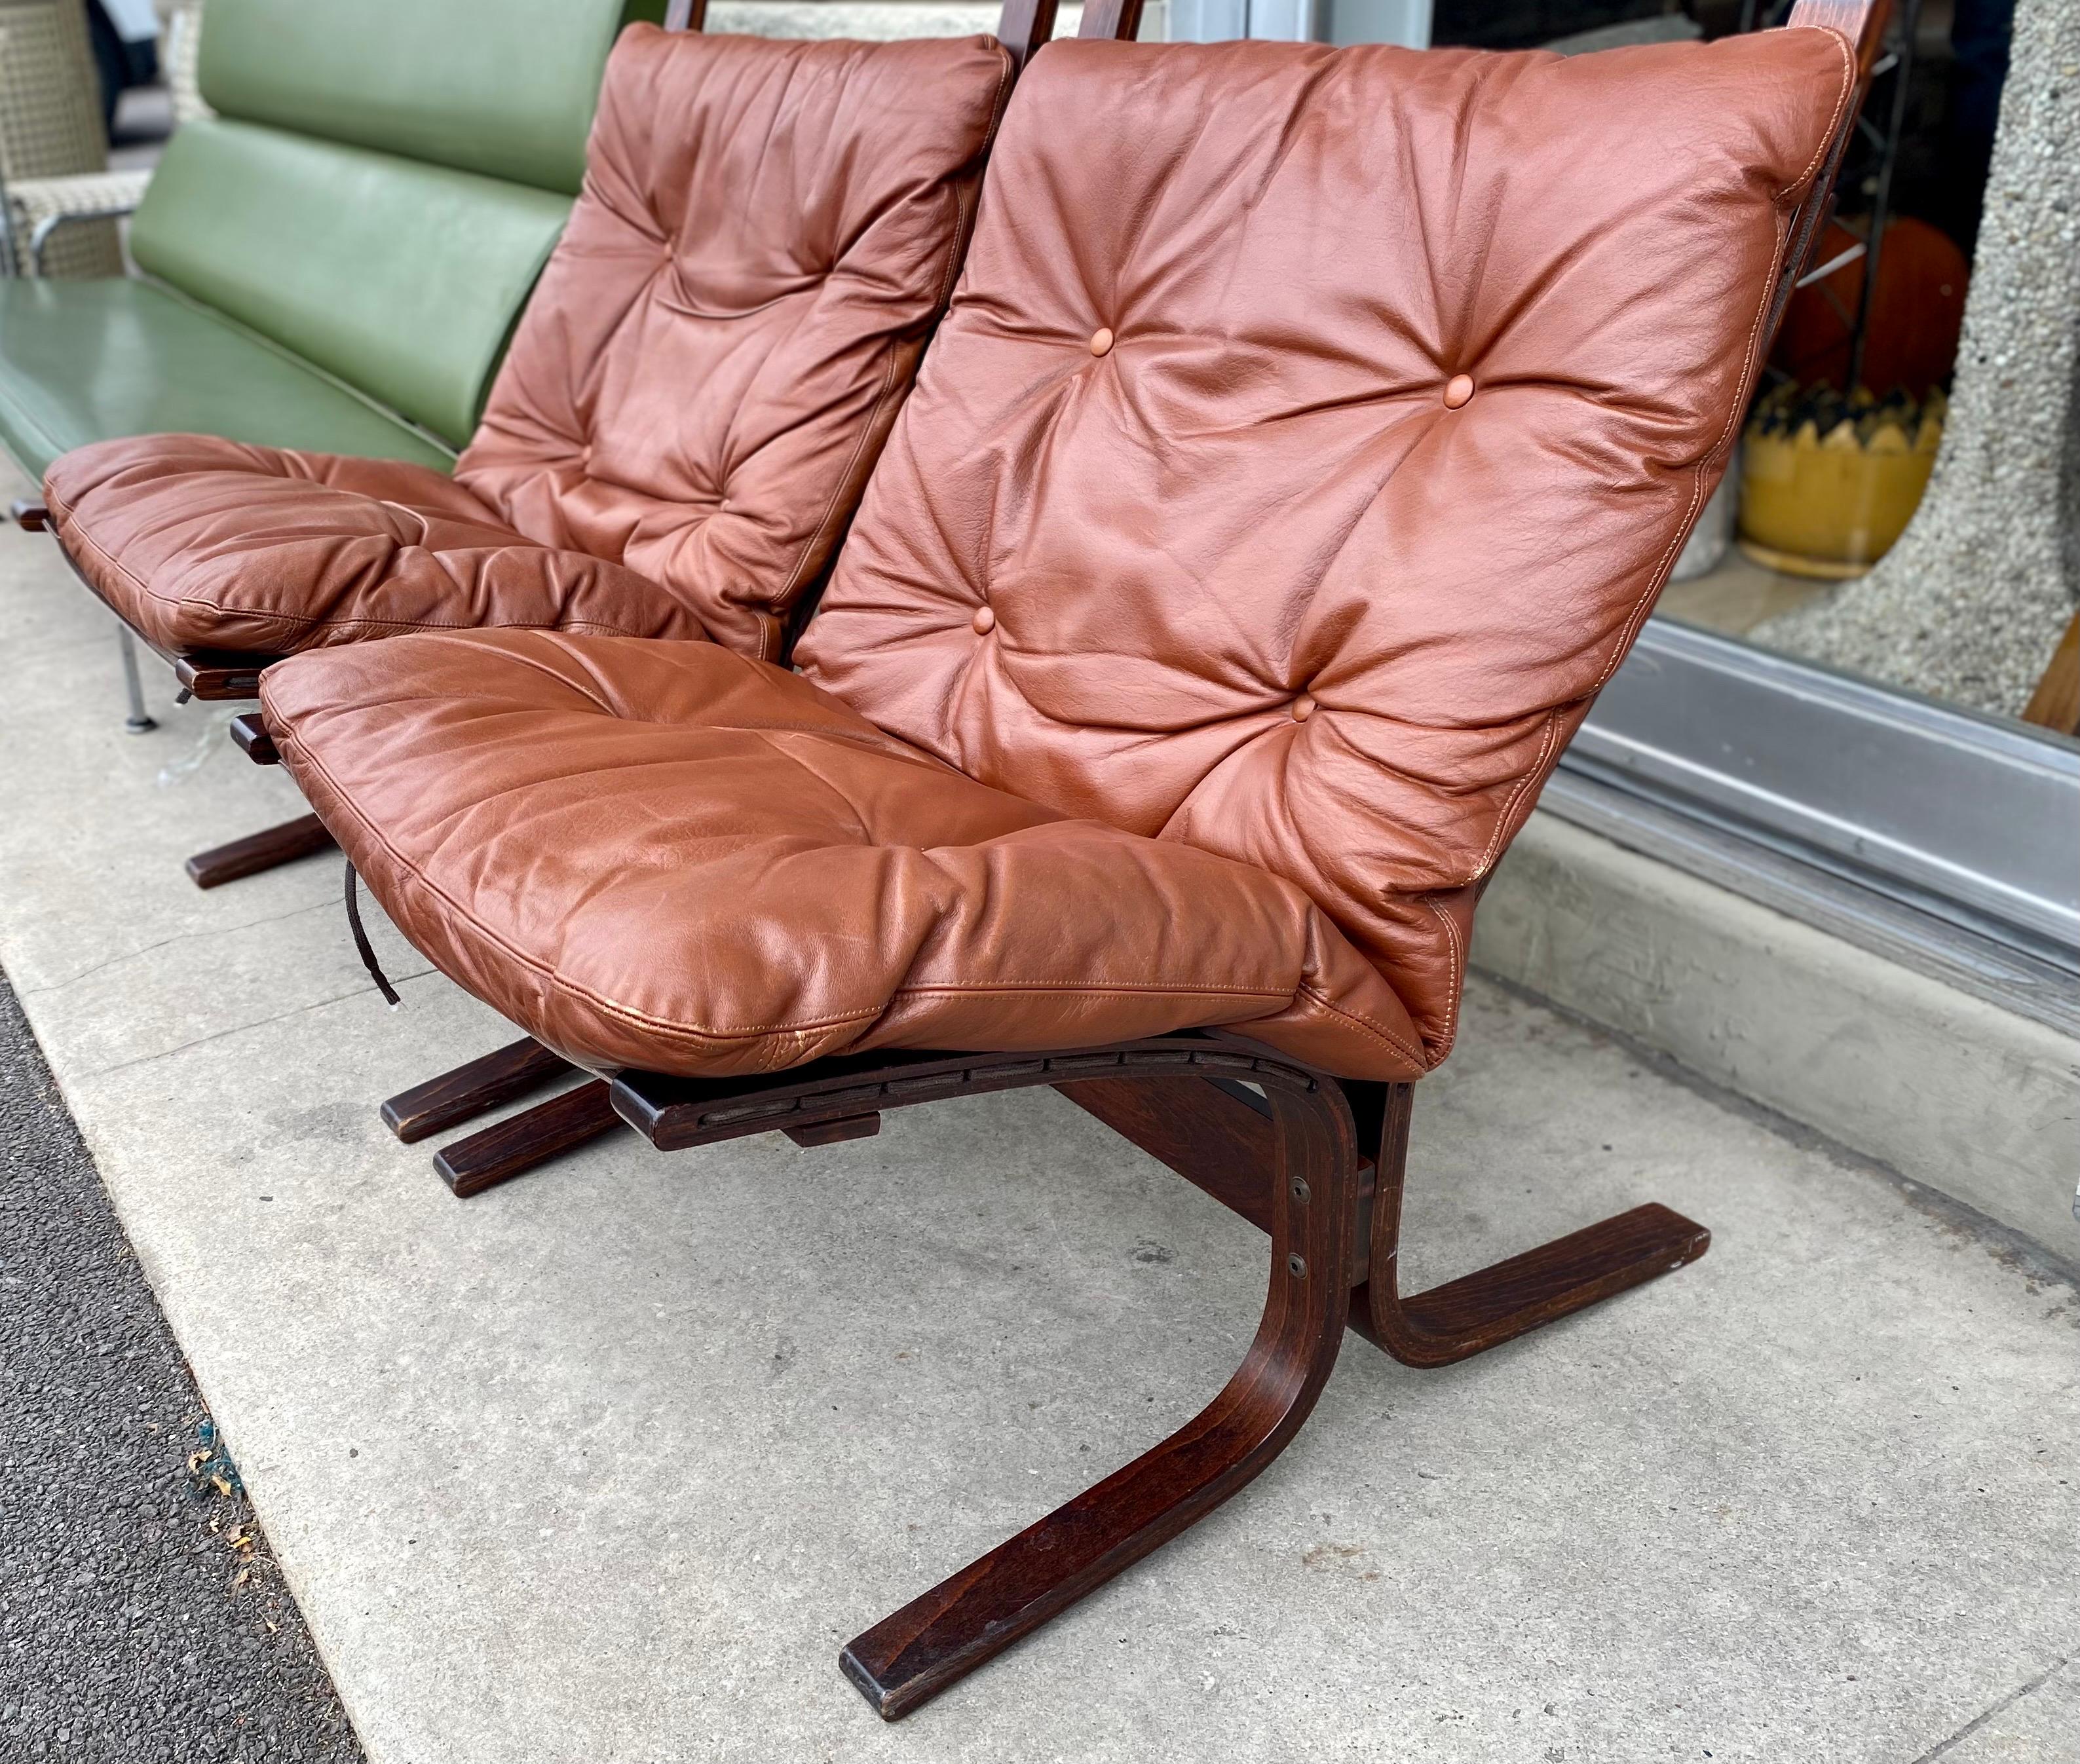 Scandinavian Modern Siesta Lounge Chairs by Westnofa was designed in the 1970s by Ingmar Relling a Norwegian designer. The wooden frame is made of bentwood with leather seating in a warm deep cognac color. These vintage lounge chairs are in great